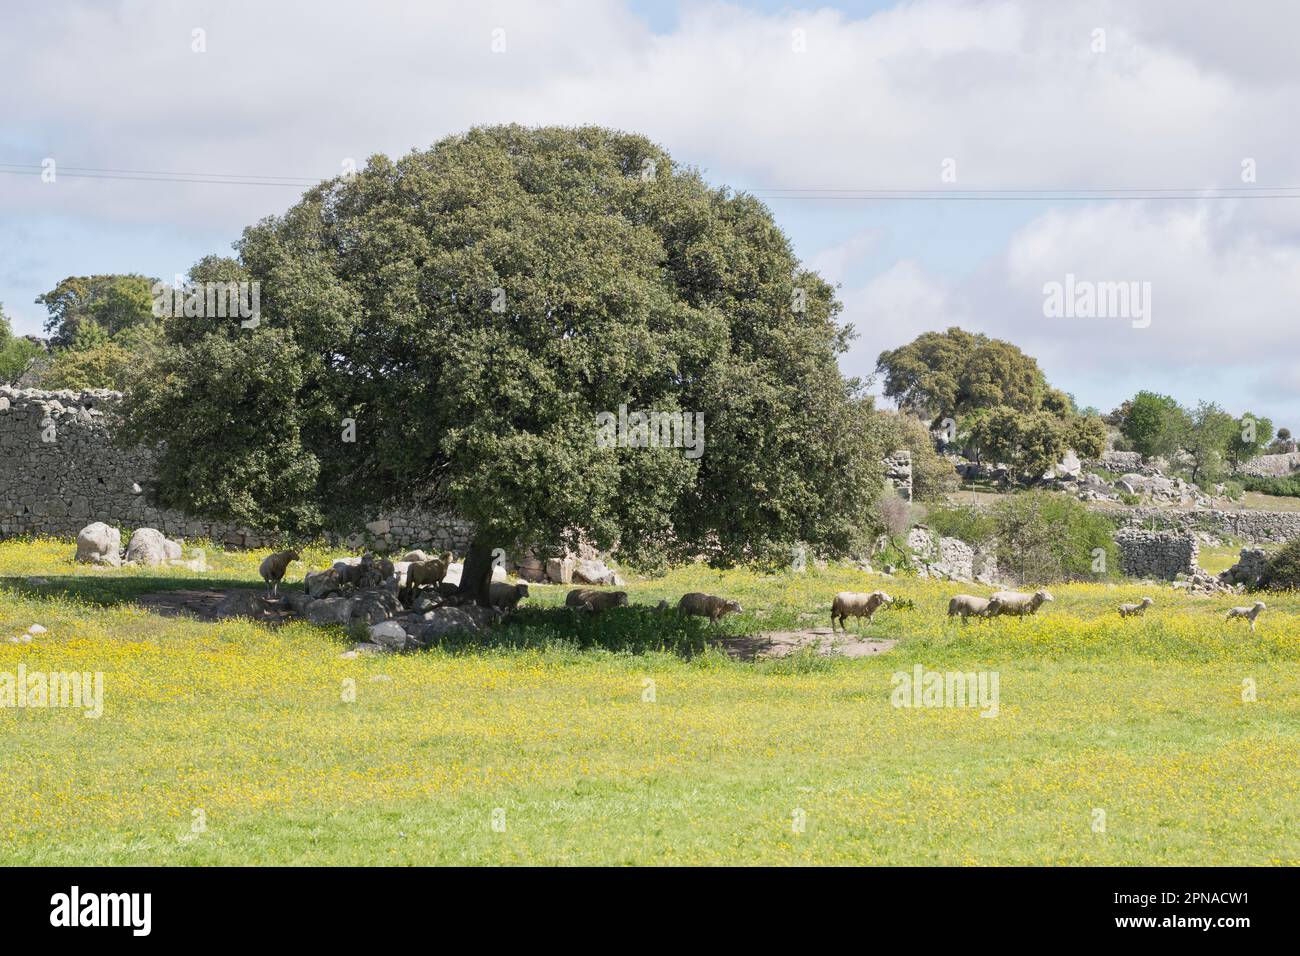 Landscape in Extremadura with sheep under a holm oak (Quercus ilex), Trujillo, Spain Stock Photo